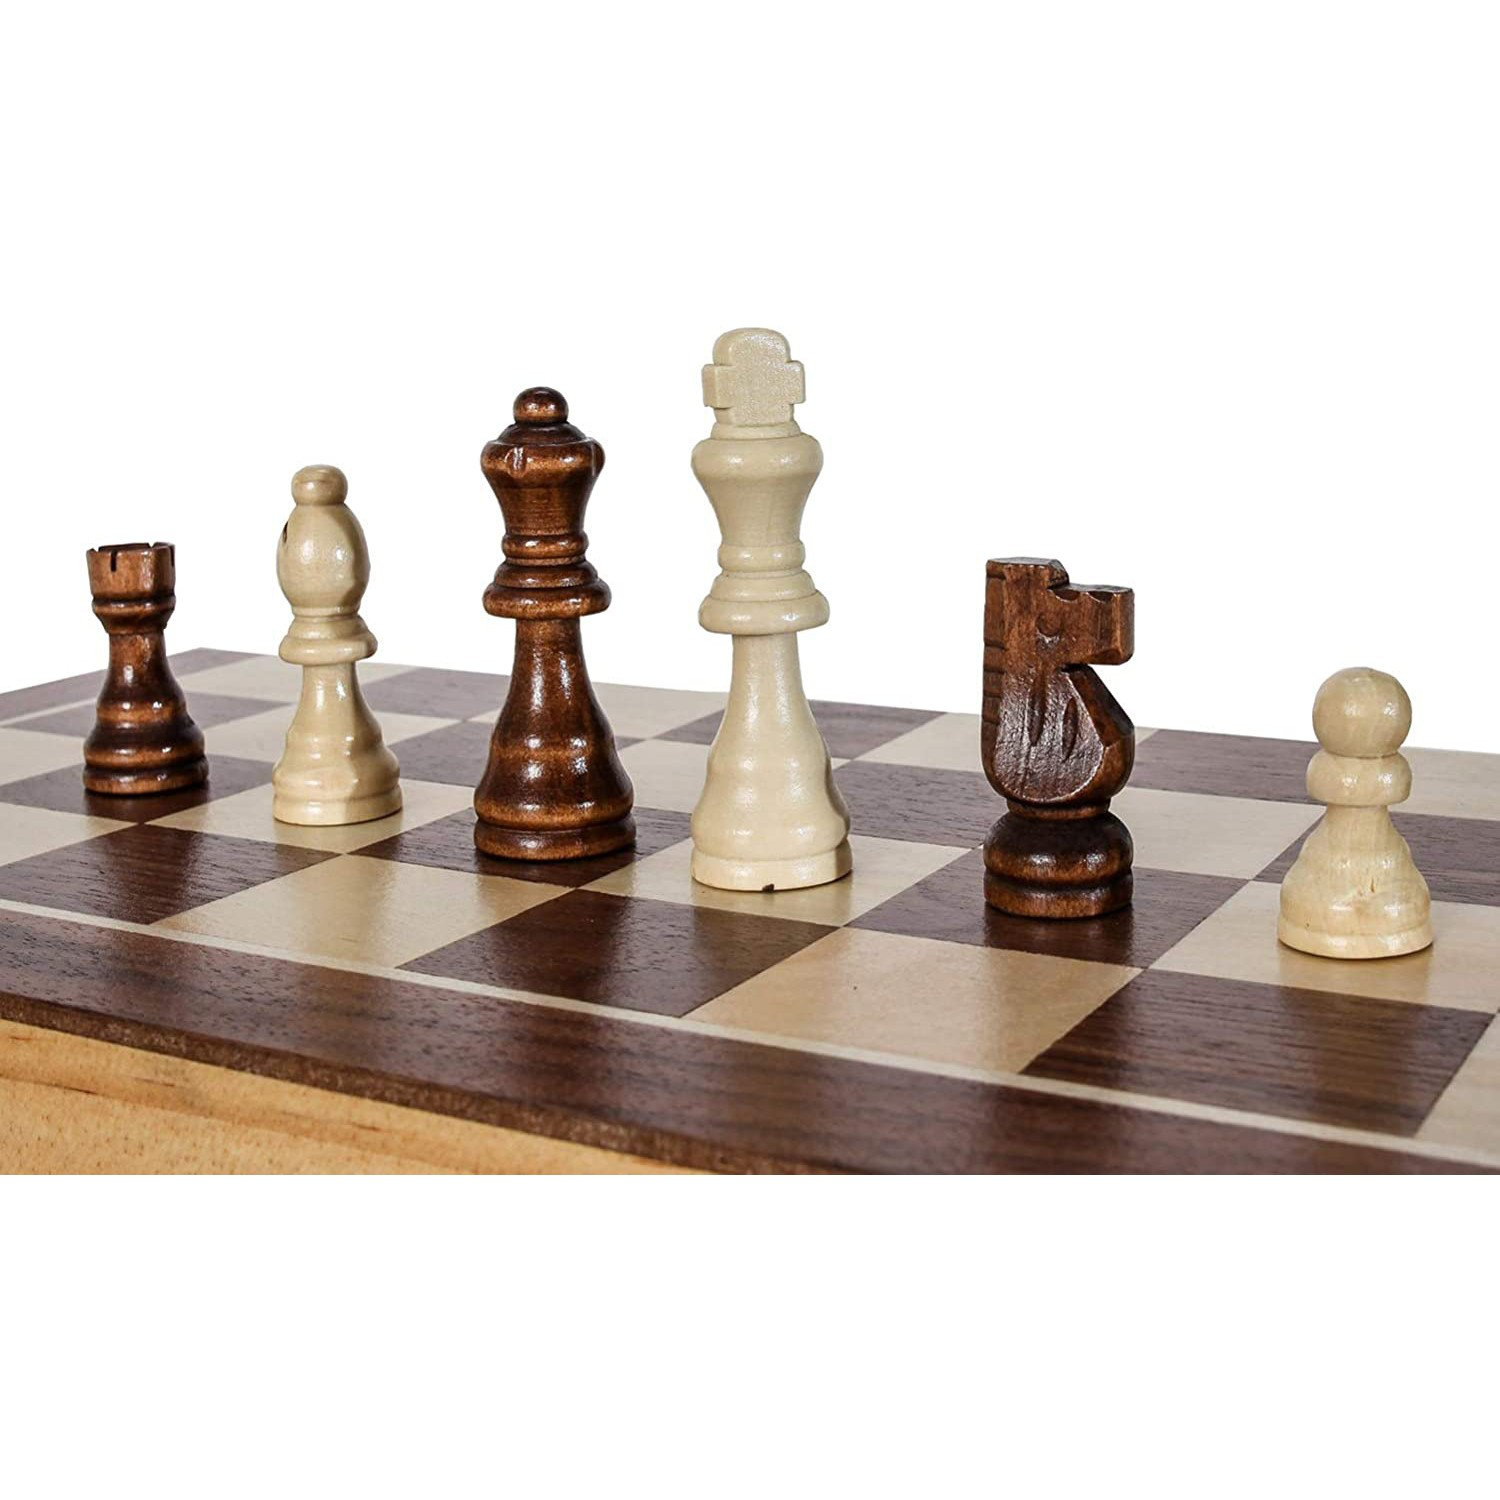  Wooden Chess Set for Kids and Adults - 15 Staunton Chess Set -  Large Folding Chess Board Game Sets - Storage for Pieces